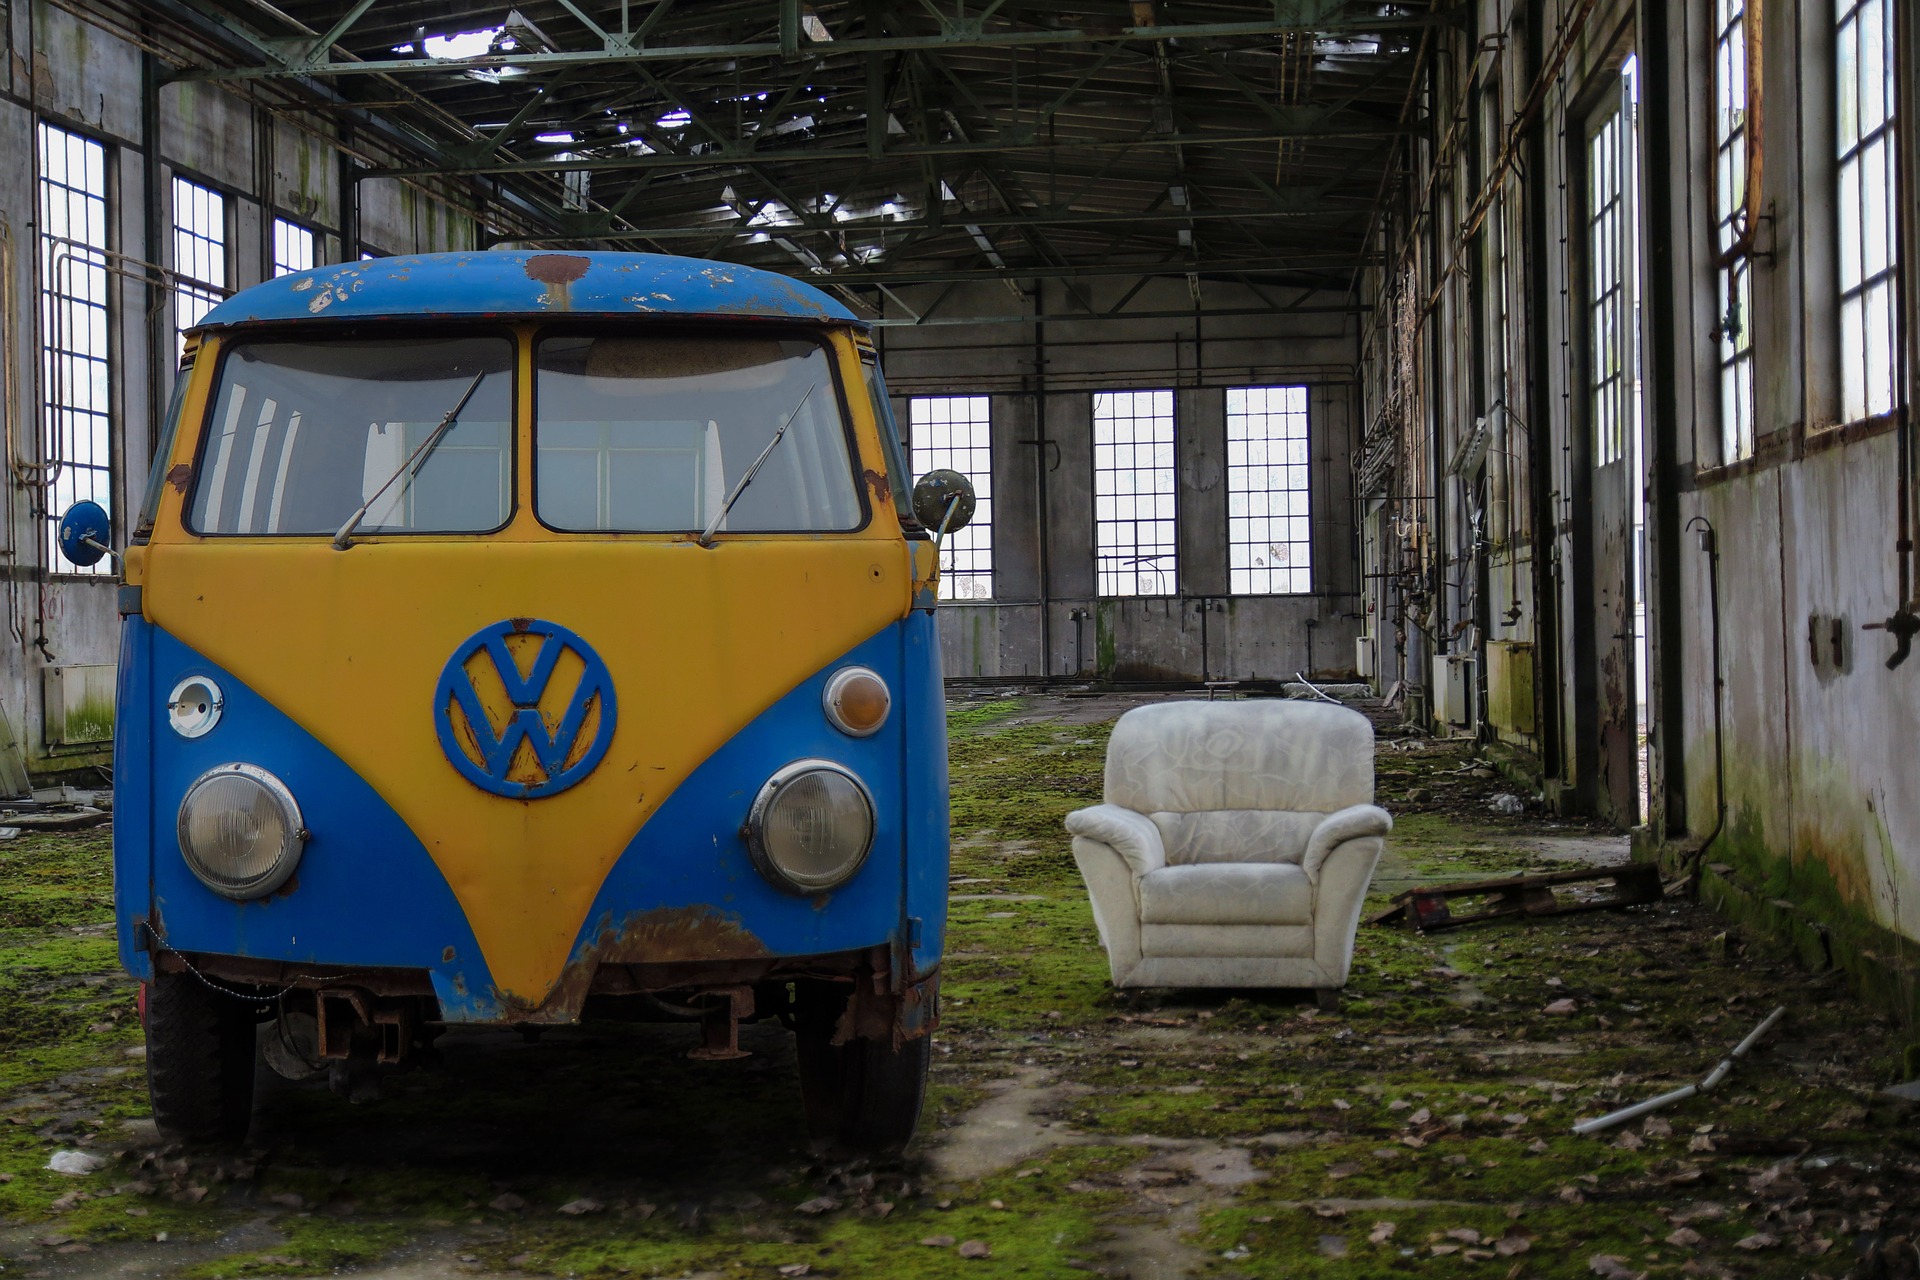 VW_old-factory